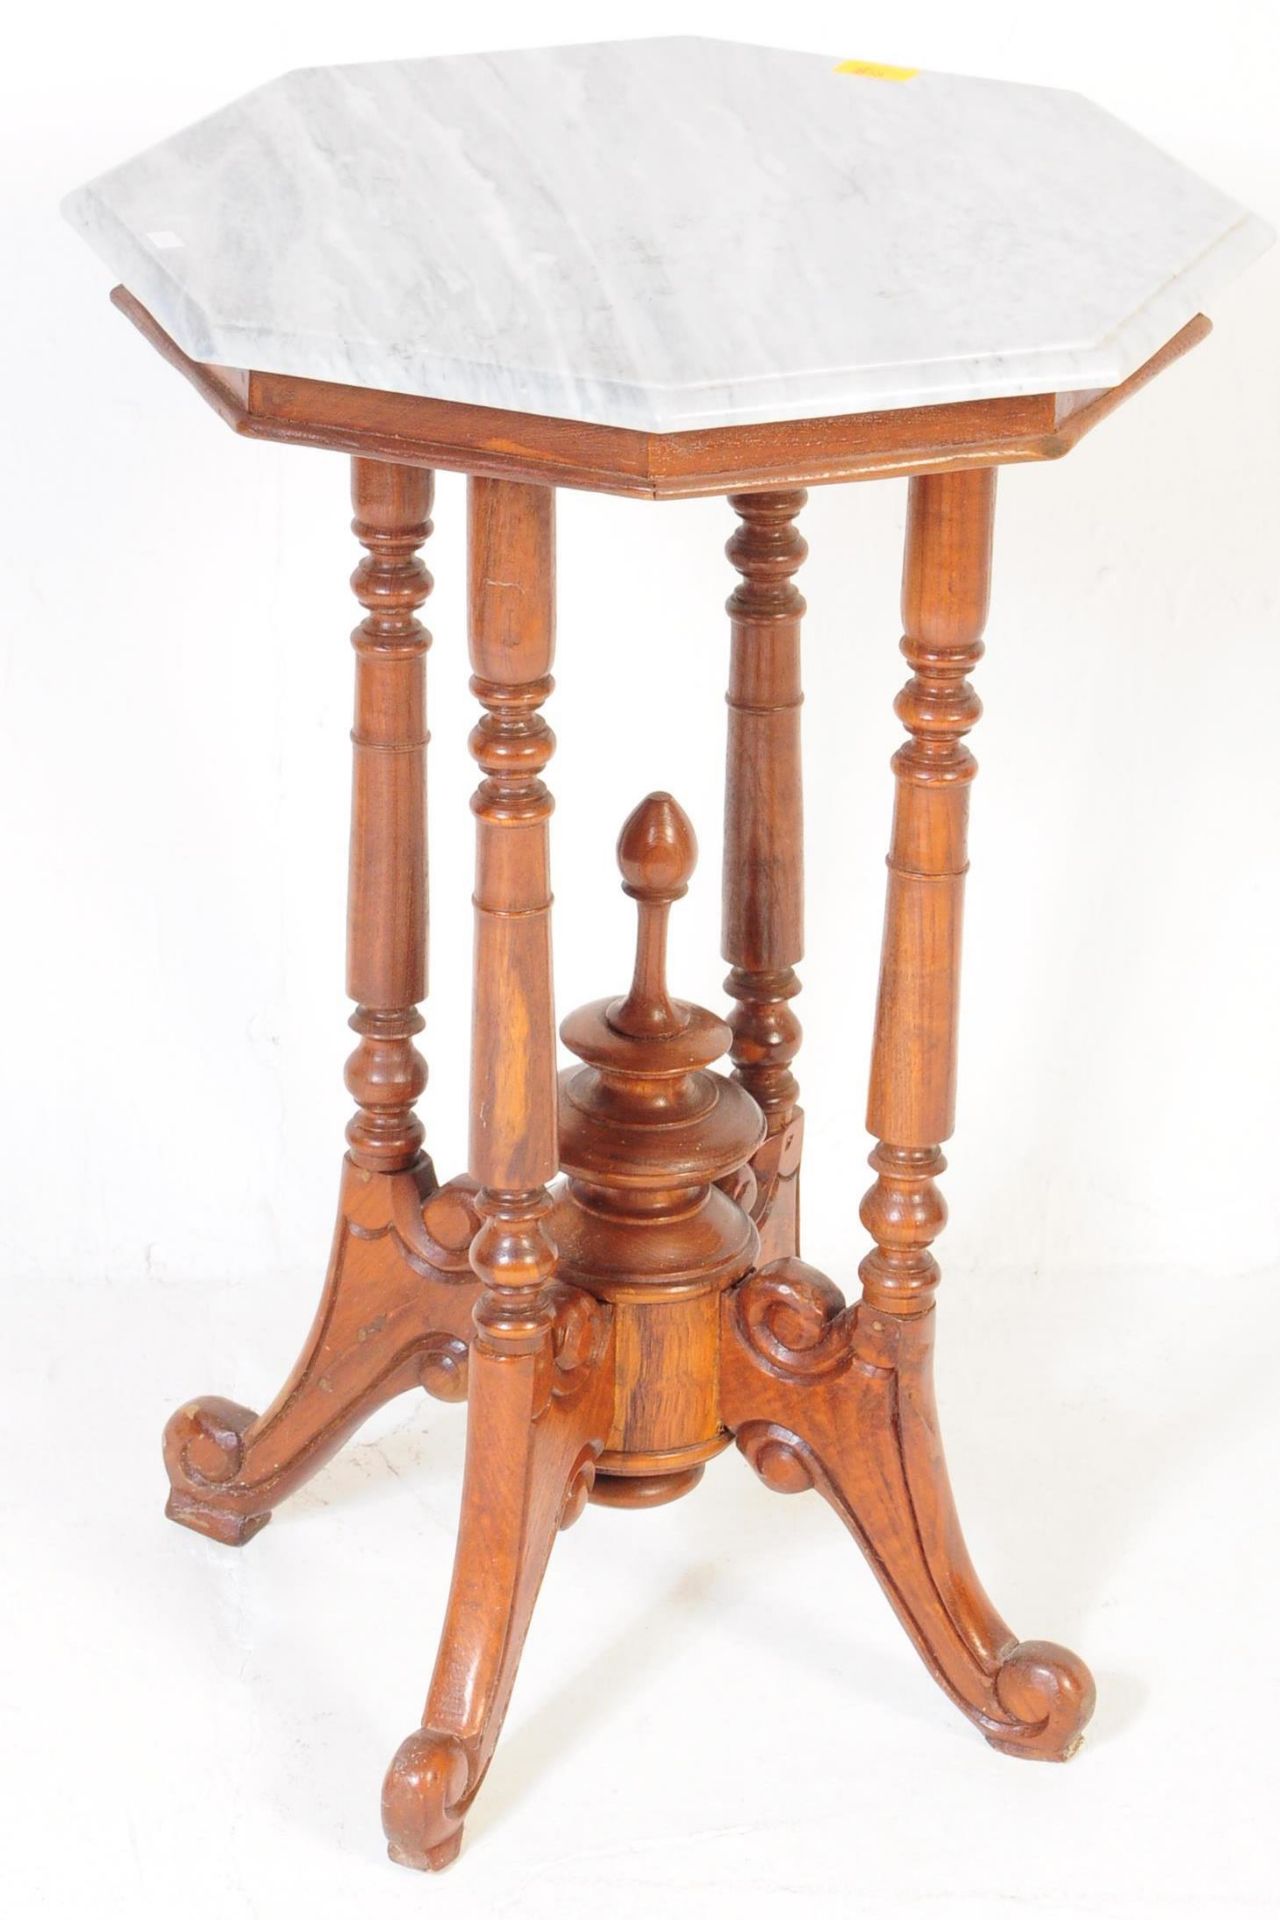 VICTORIAN STYLE MAHOGANY & WHITE VEINED MARBLE TABLE - Image 2 of 4